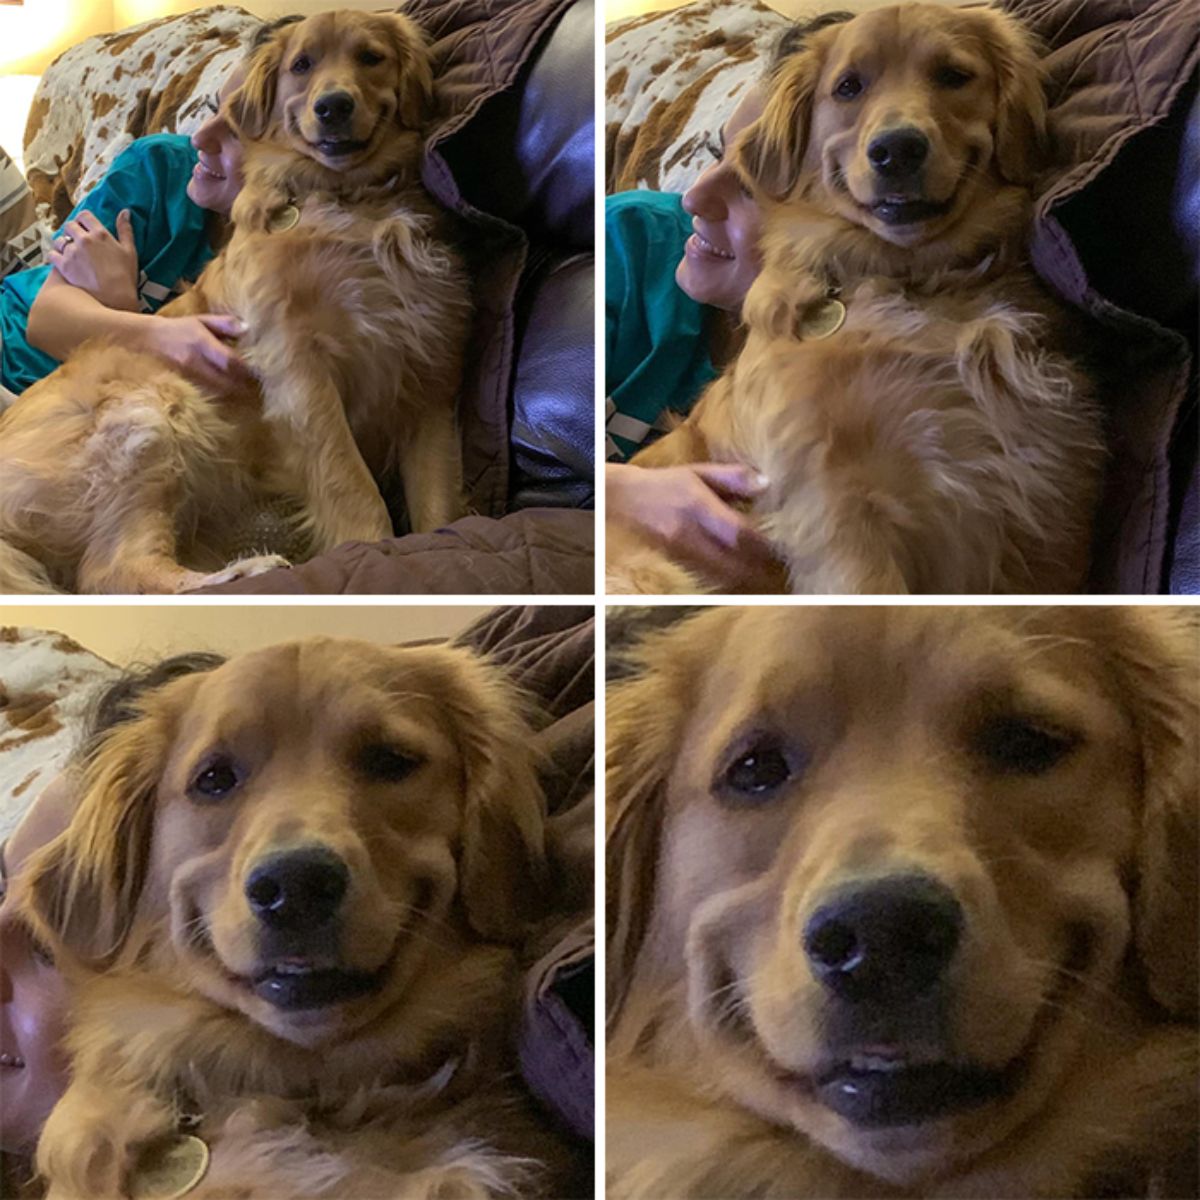 4 photos of a smiling golden retriever being cuddled by someone